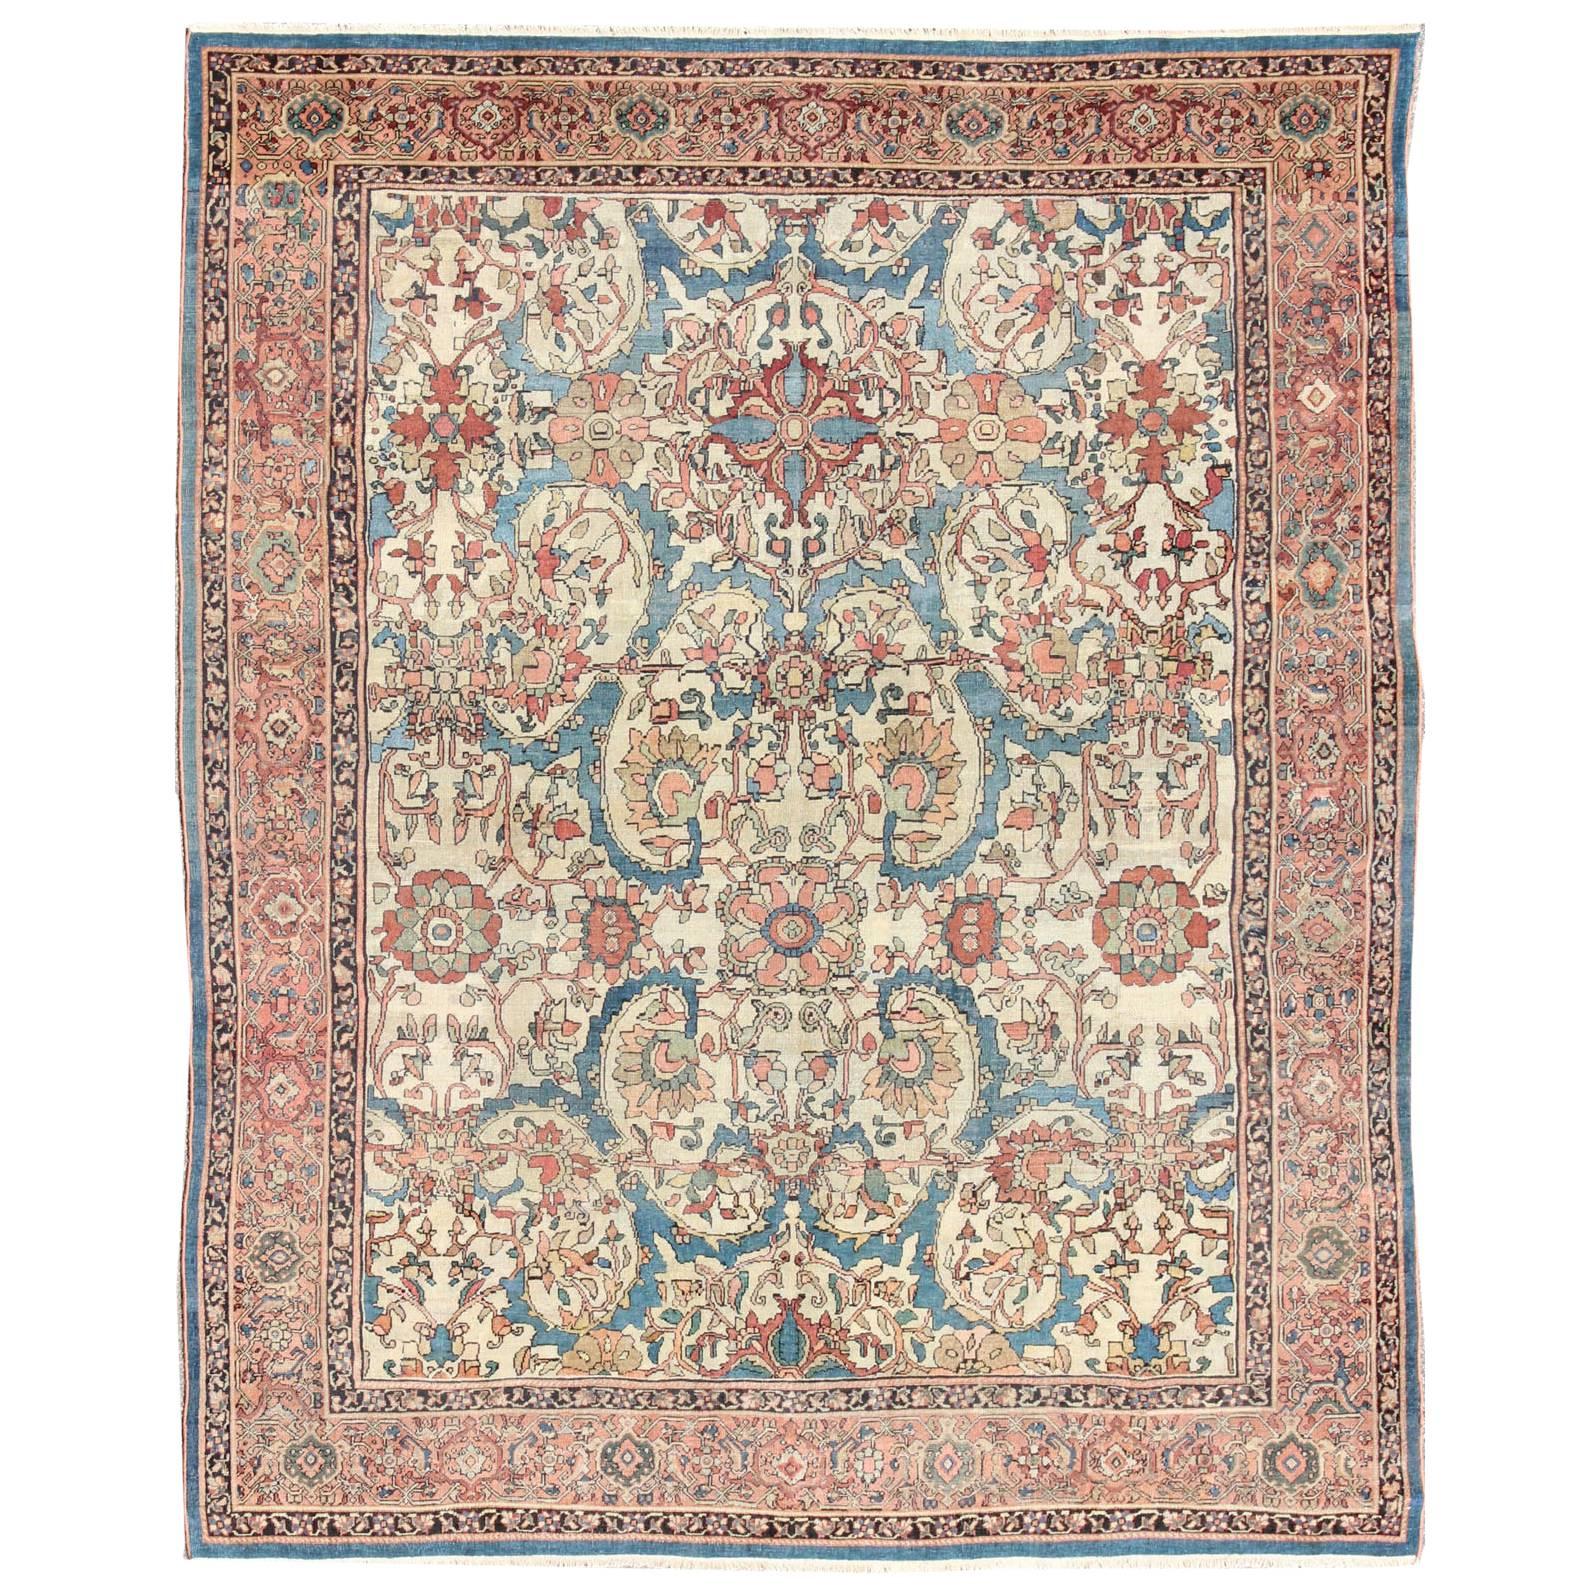 Antique Persian Sultanabad Rug in Ivory Background, Blue, Salmon & Multi Colors 